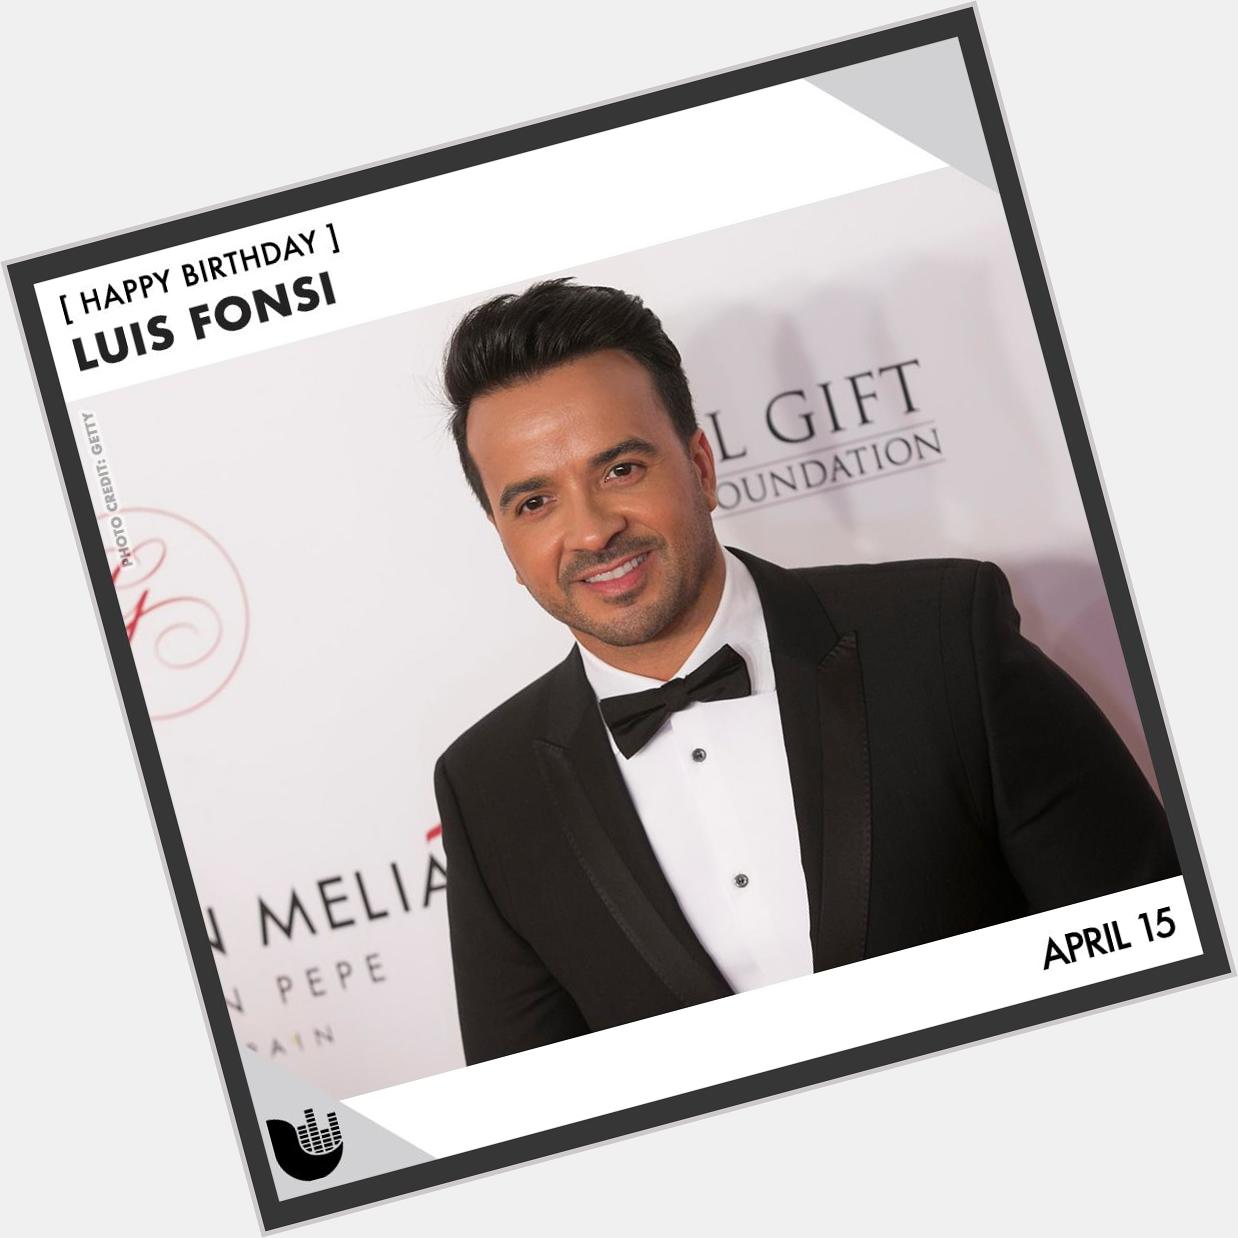 Join us in wishing a happy birthday to Luis Fonsi. 